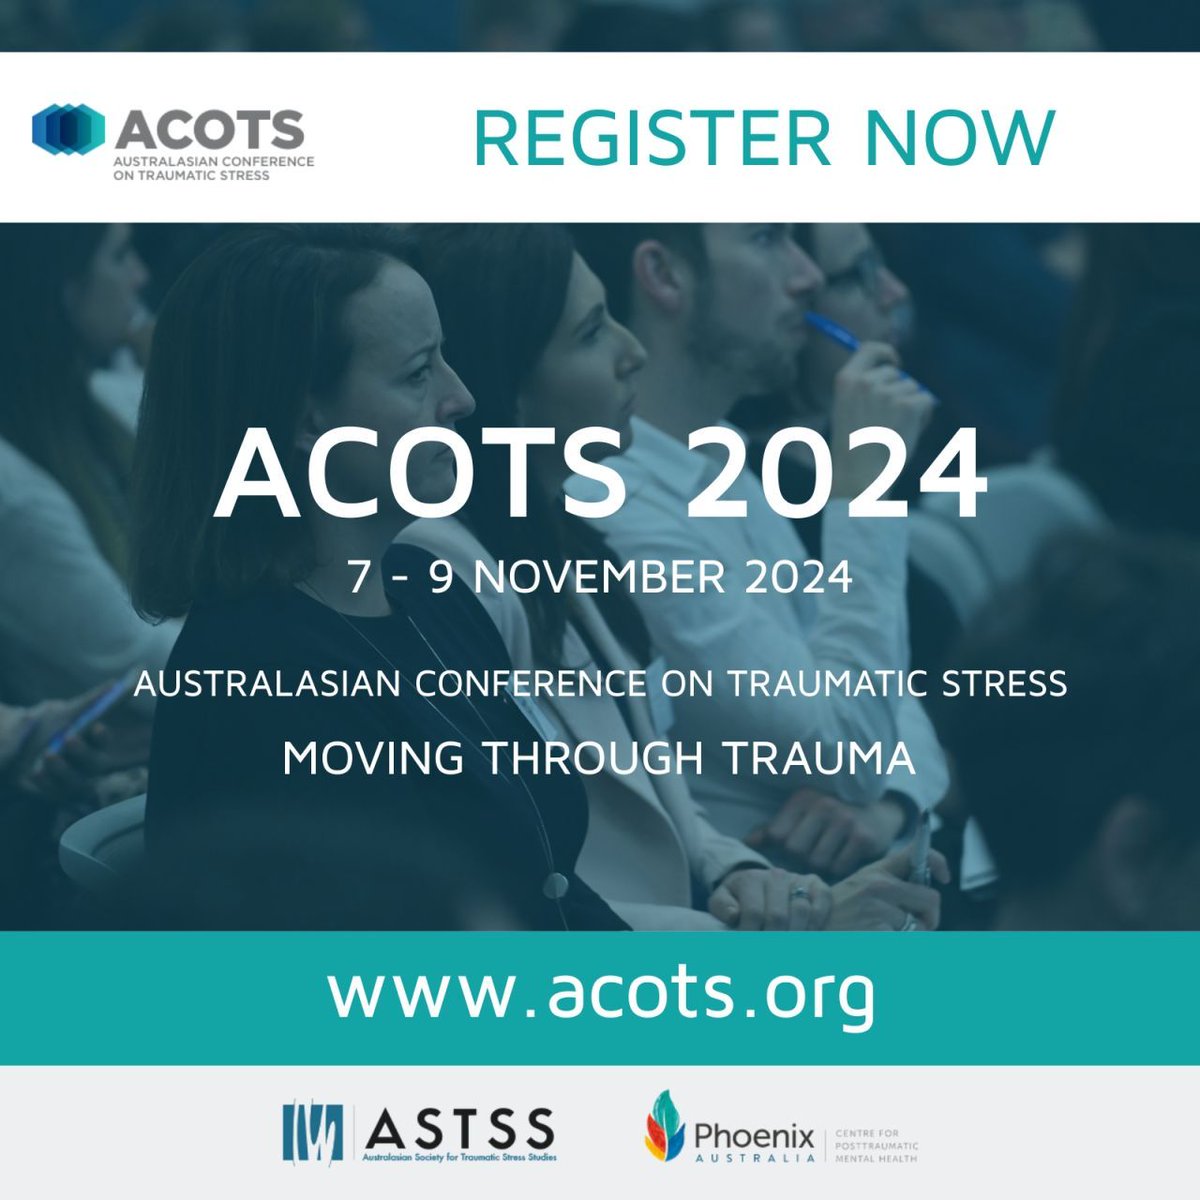 Just a reminder that the SUPER EARLYBIRD registration prices for #ACOTS2024 are still available until 31st of May! Register now via our website acots.org